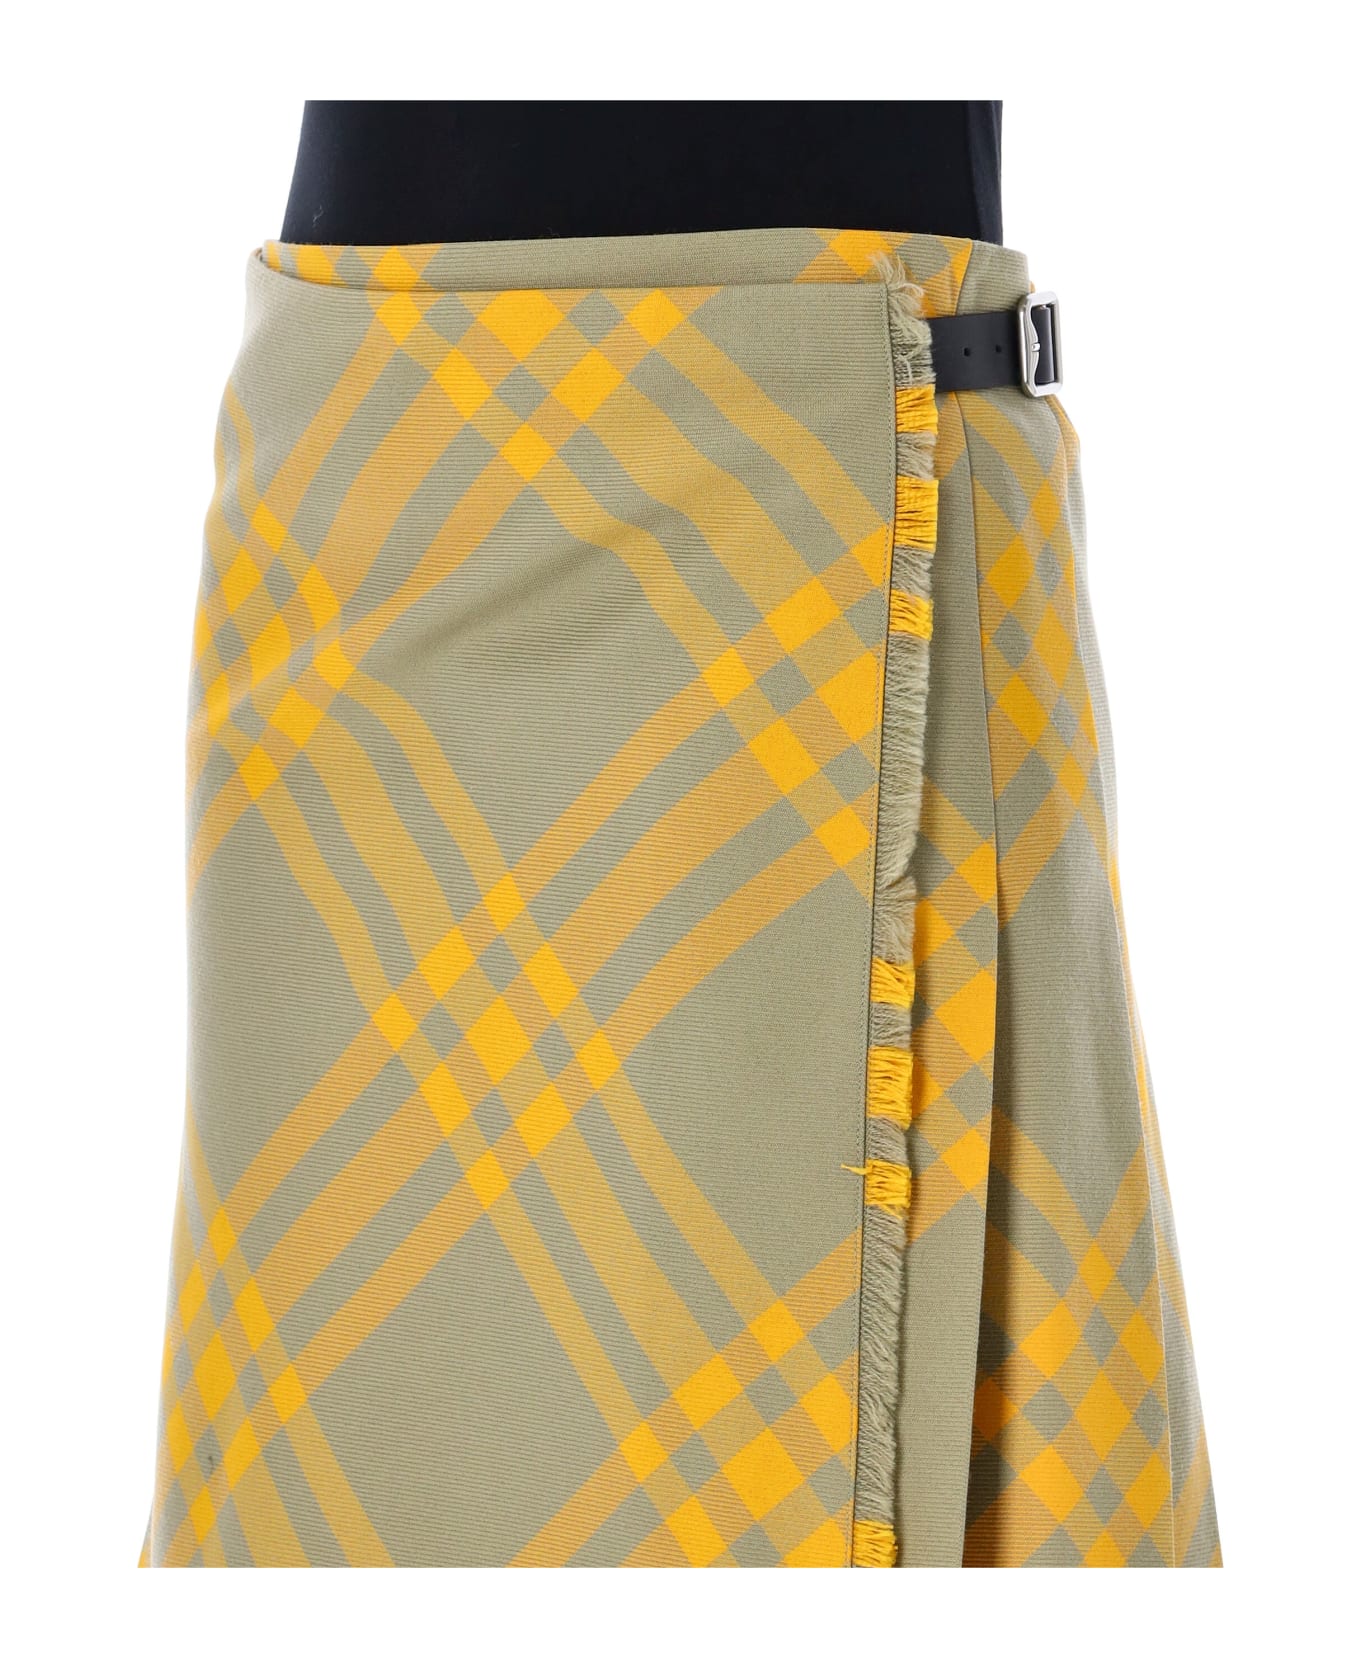 Burberry London Check Wool Blend Kilt - burberry embroidered tulle sneakers item